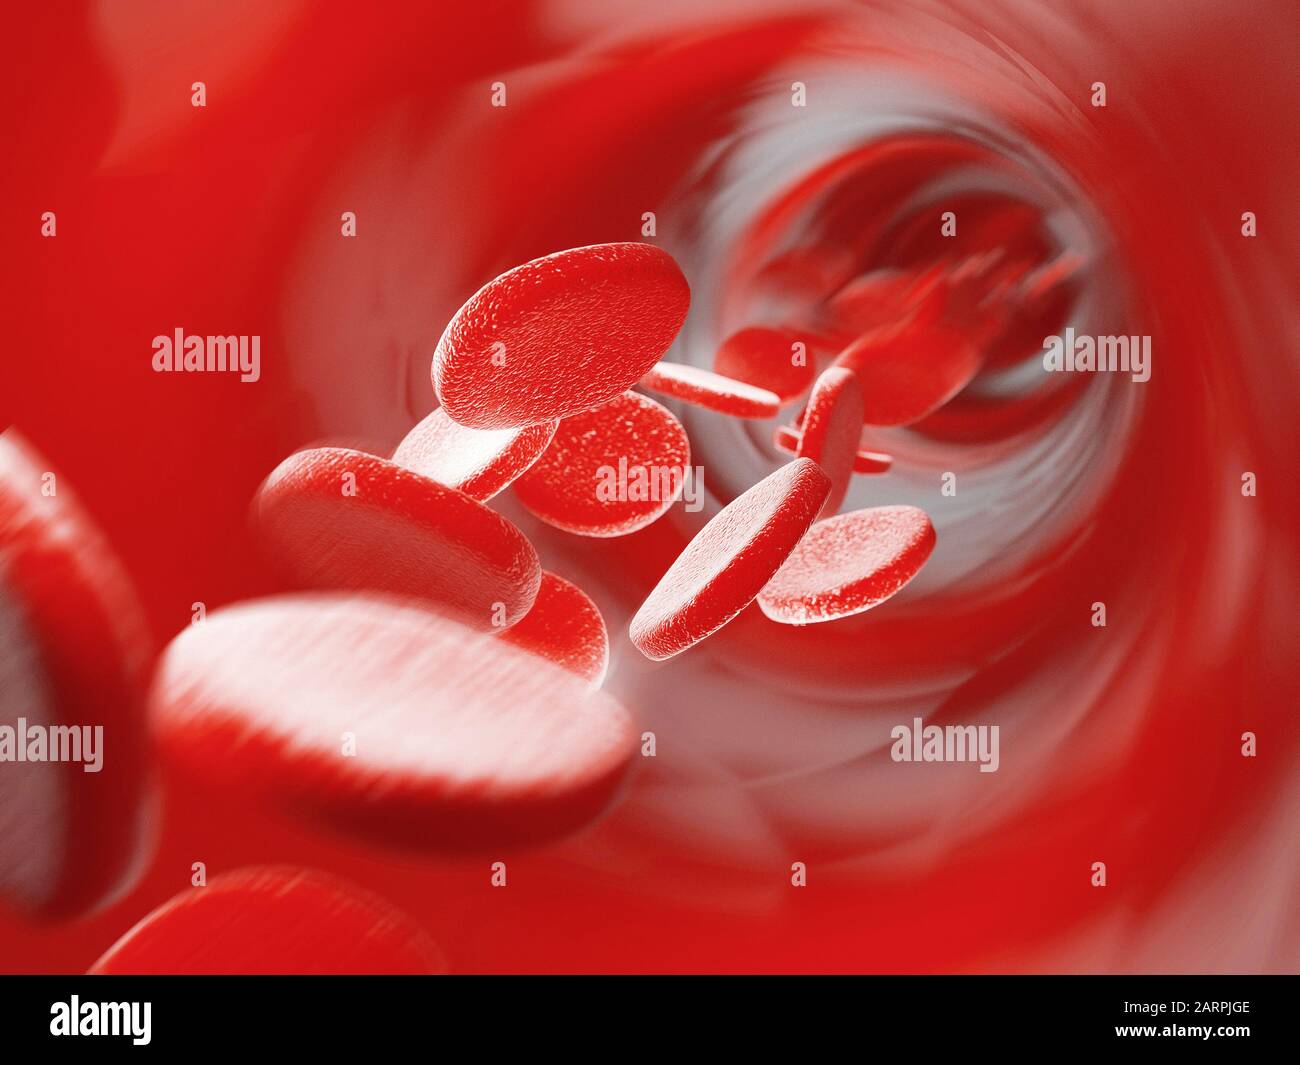 3D rendering illustration of many blood cells Stock Photo